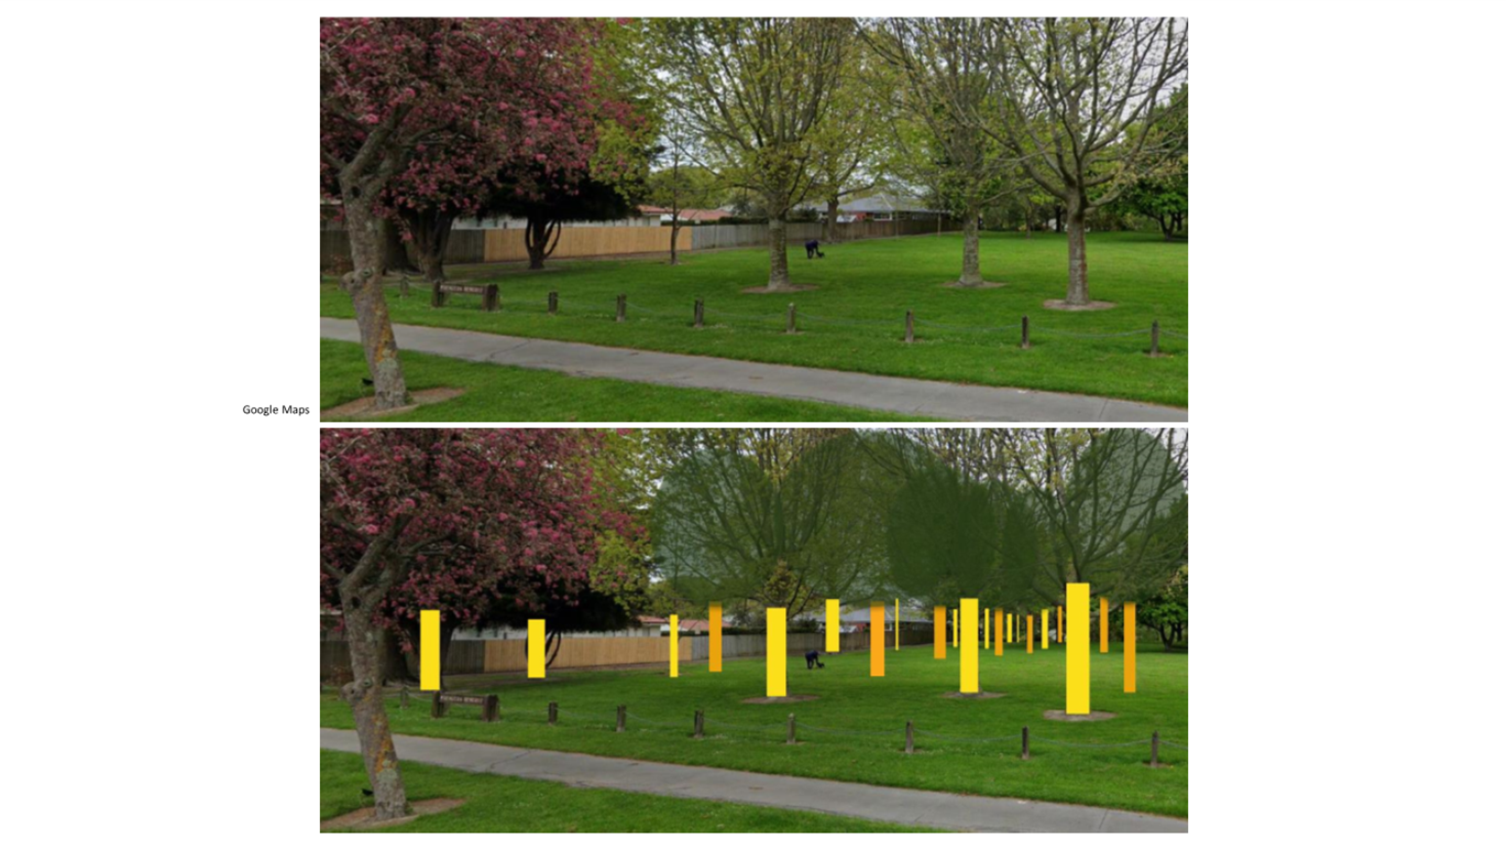 A collage of a park

Description automatically generated